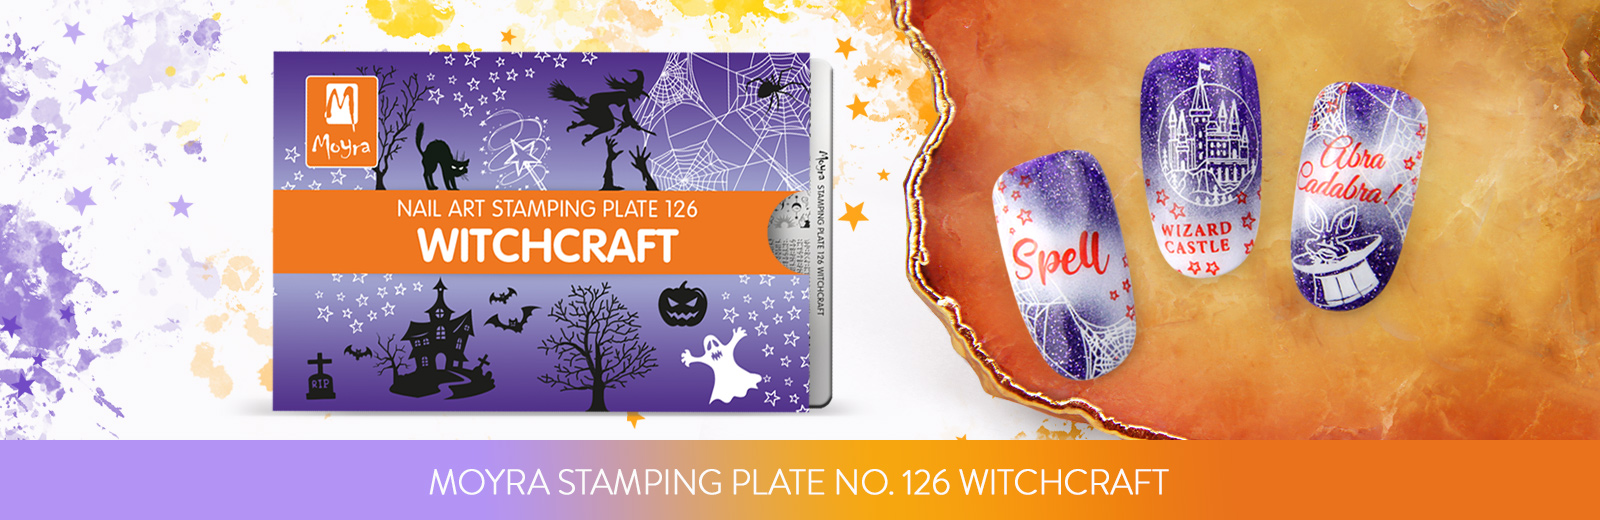 Moyra stamping plate 126 Witchcraft